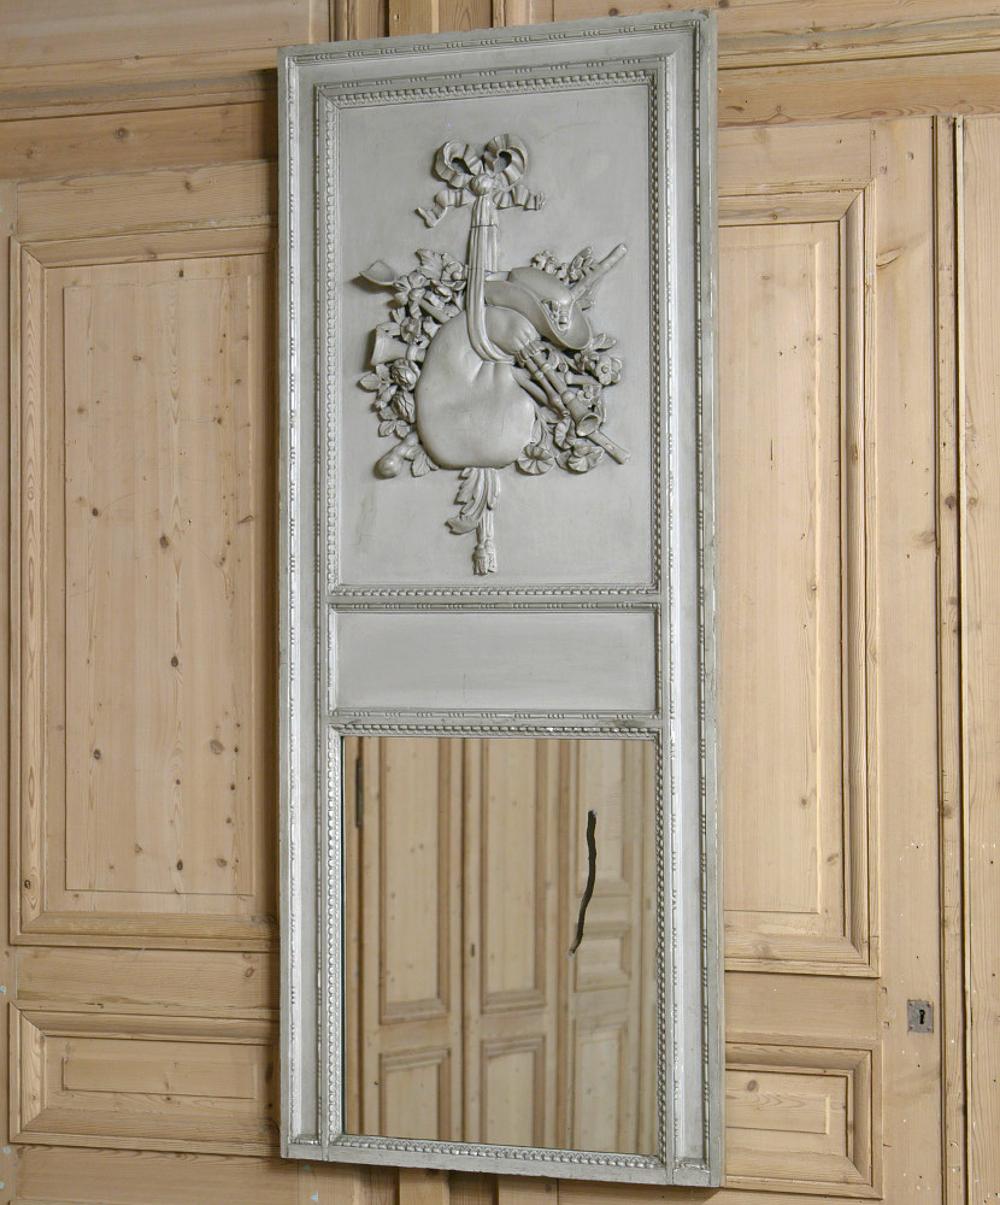 Here is a gorgeous 19th century Country French painted Louis XVI style Trumeau mirror boasting its original patina grey painted finish which has acquired a wonderful patina over the past century. The bold relief on the top panel has been hand carved